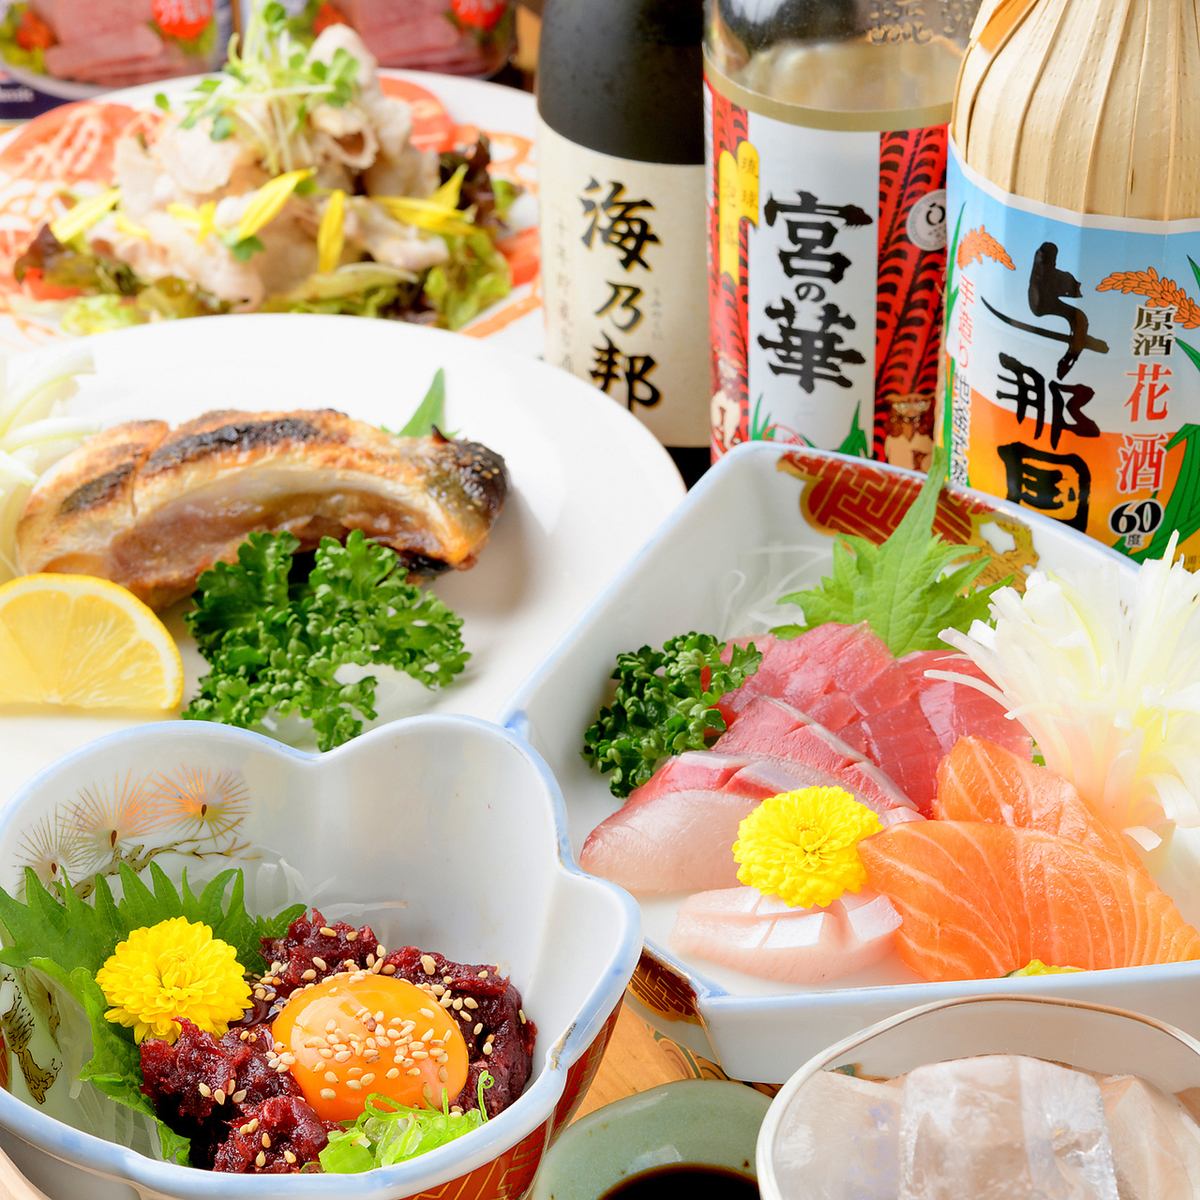 We are preparing the proud dishes and sake that we took the time to make ♪